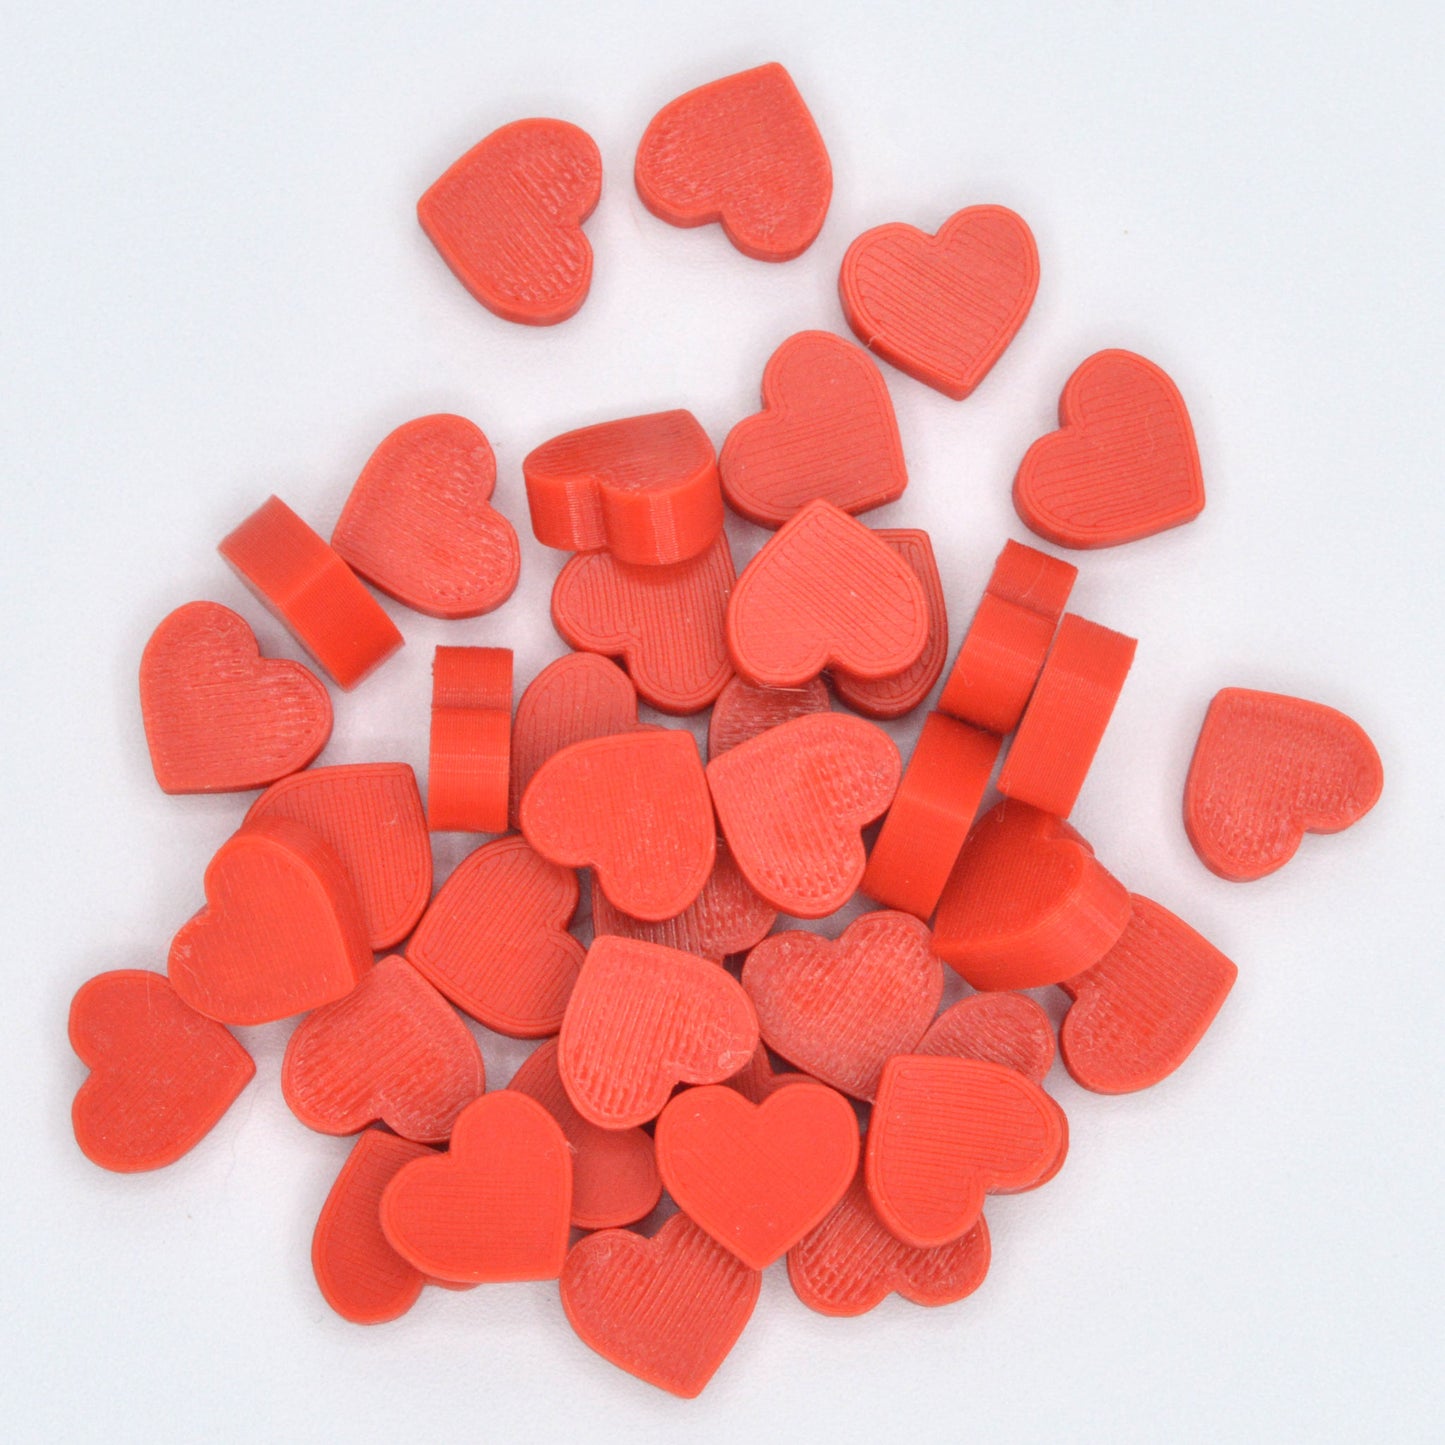 HEART tokens for board games